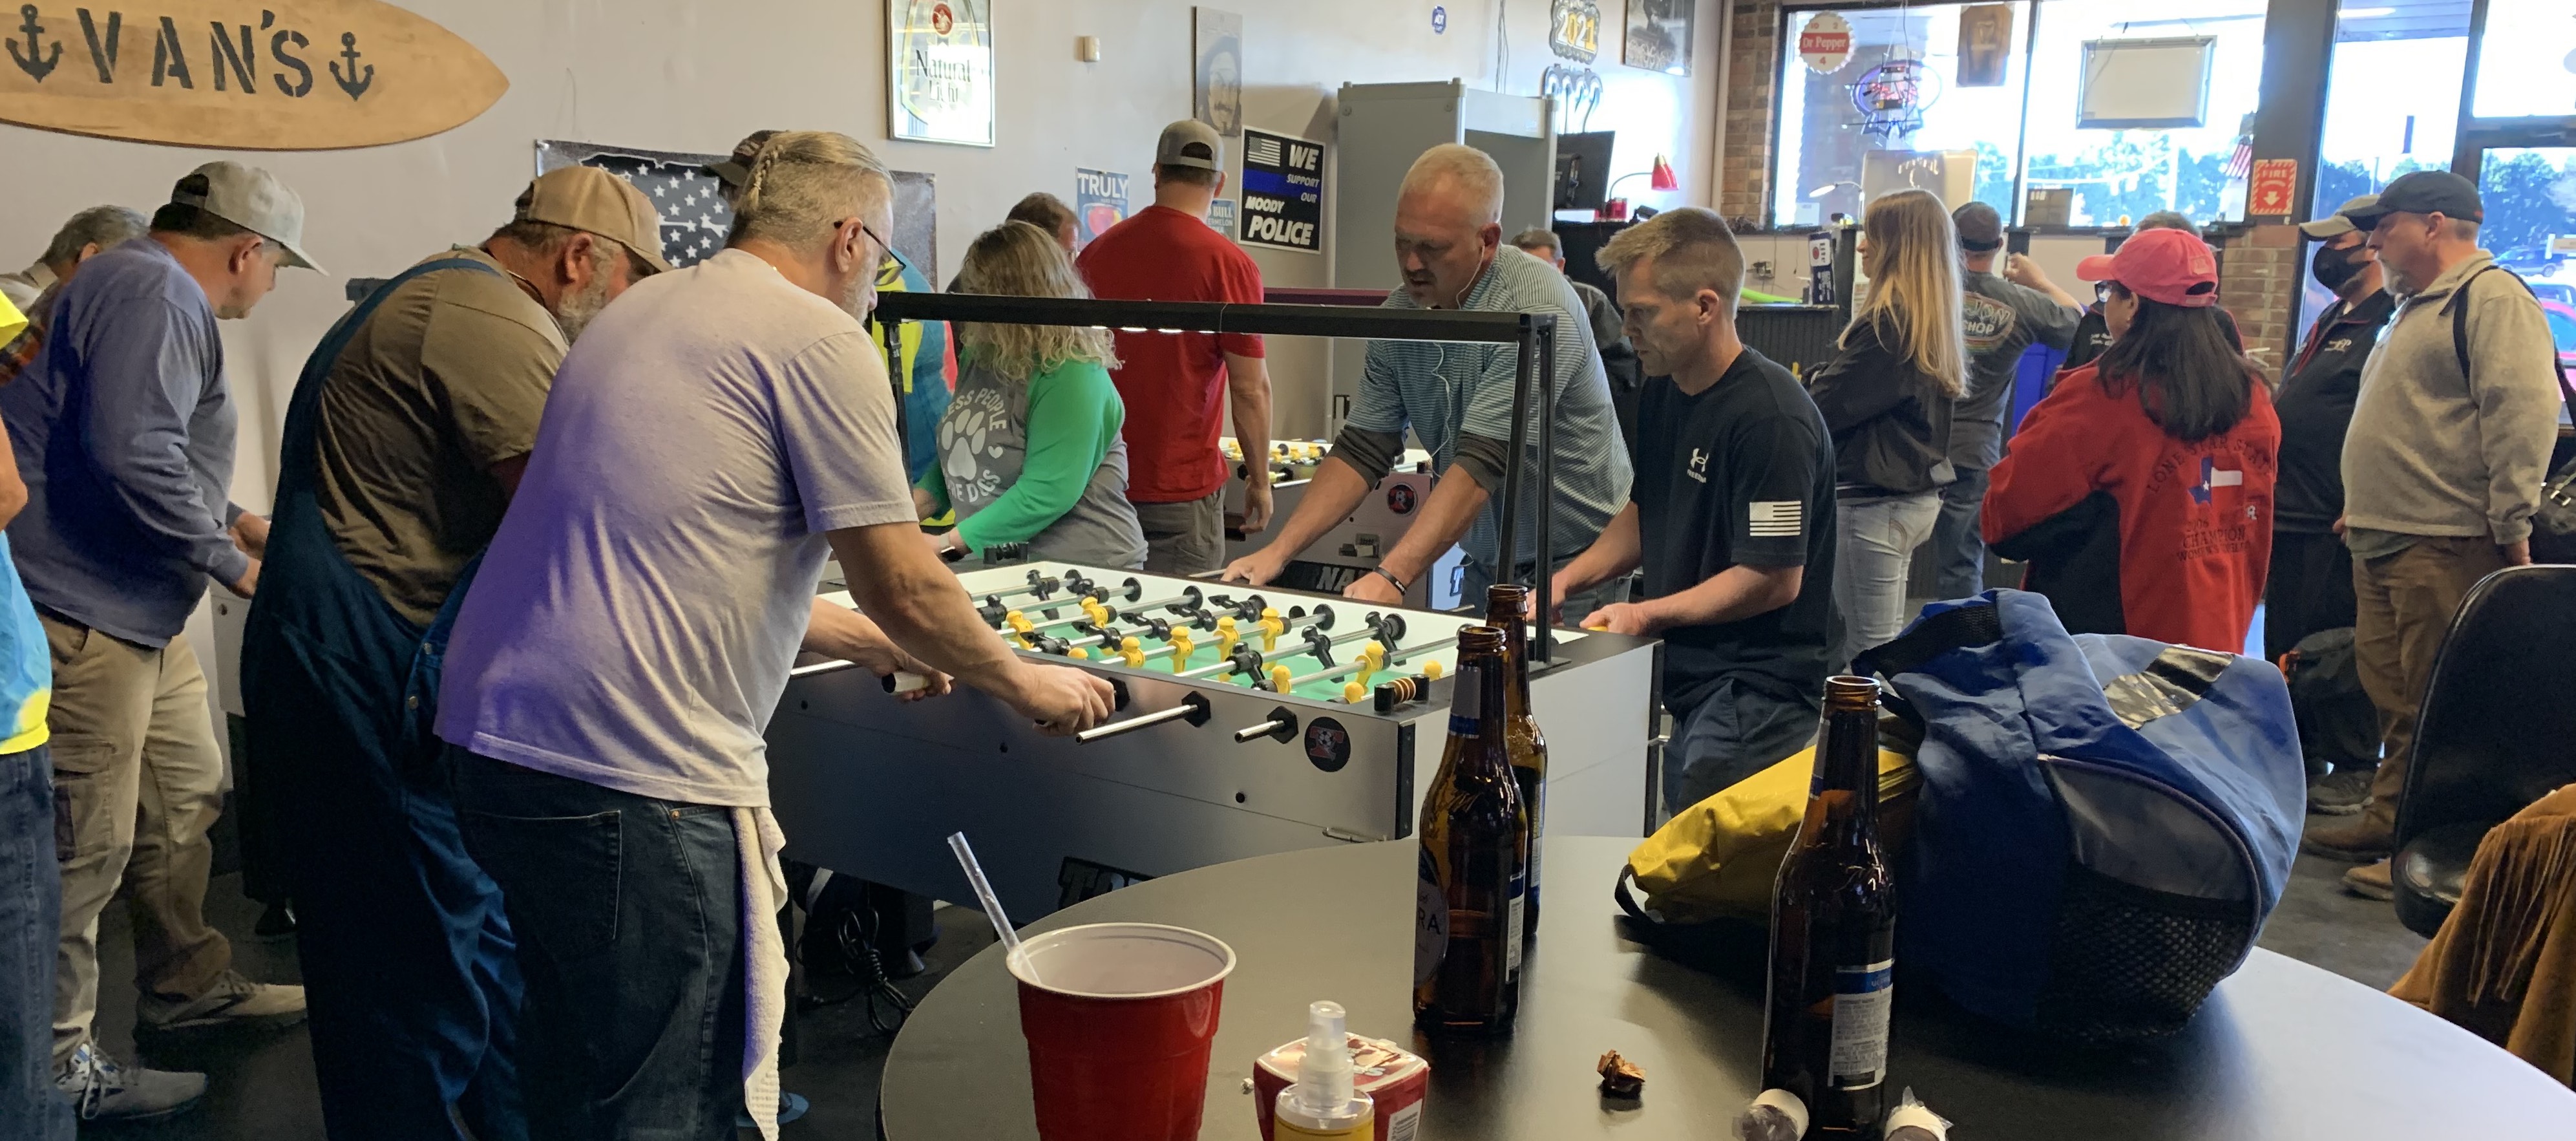 Let's play some foosball, shown is tournament action in Leeds,AL. March 12, 2022.